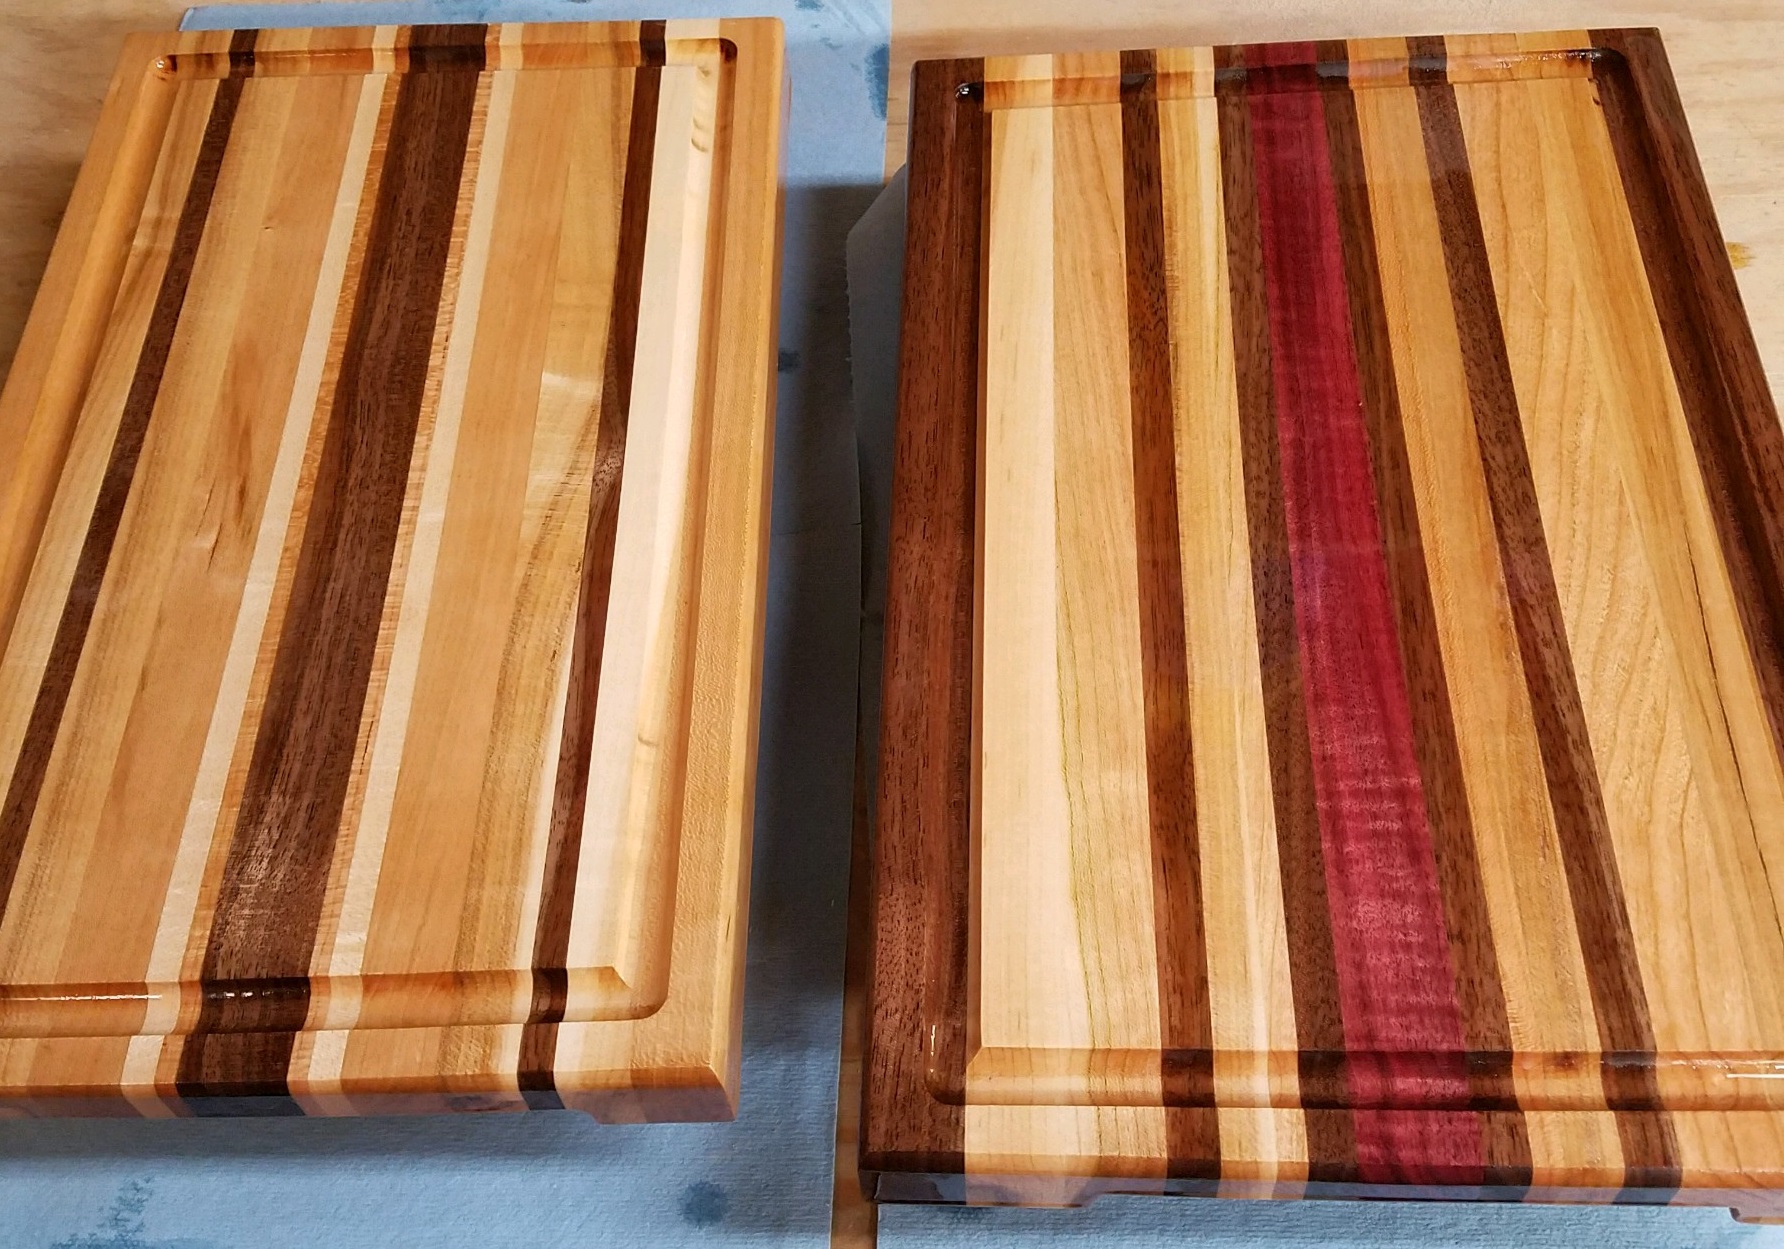 Picture of wooden cutting board. Picture is taken from an angle to show the grain detail of the woods used to create the board.